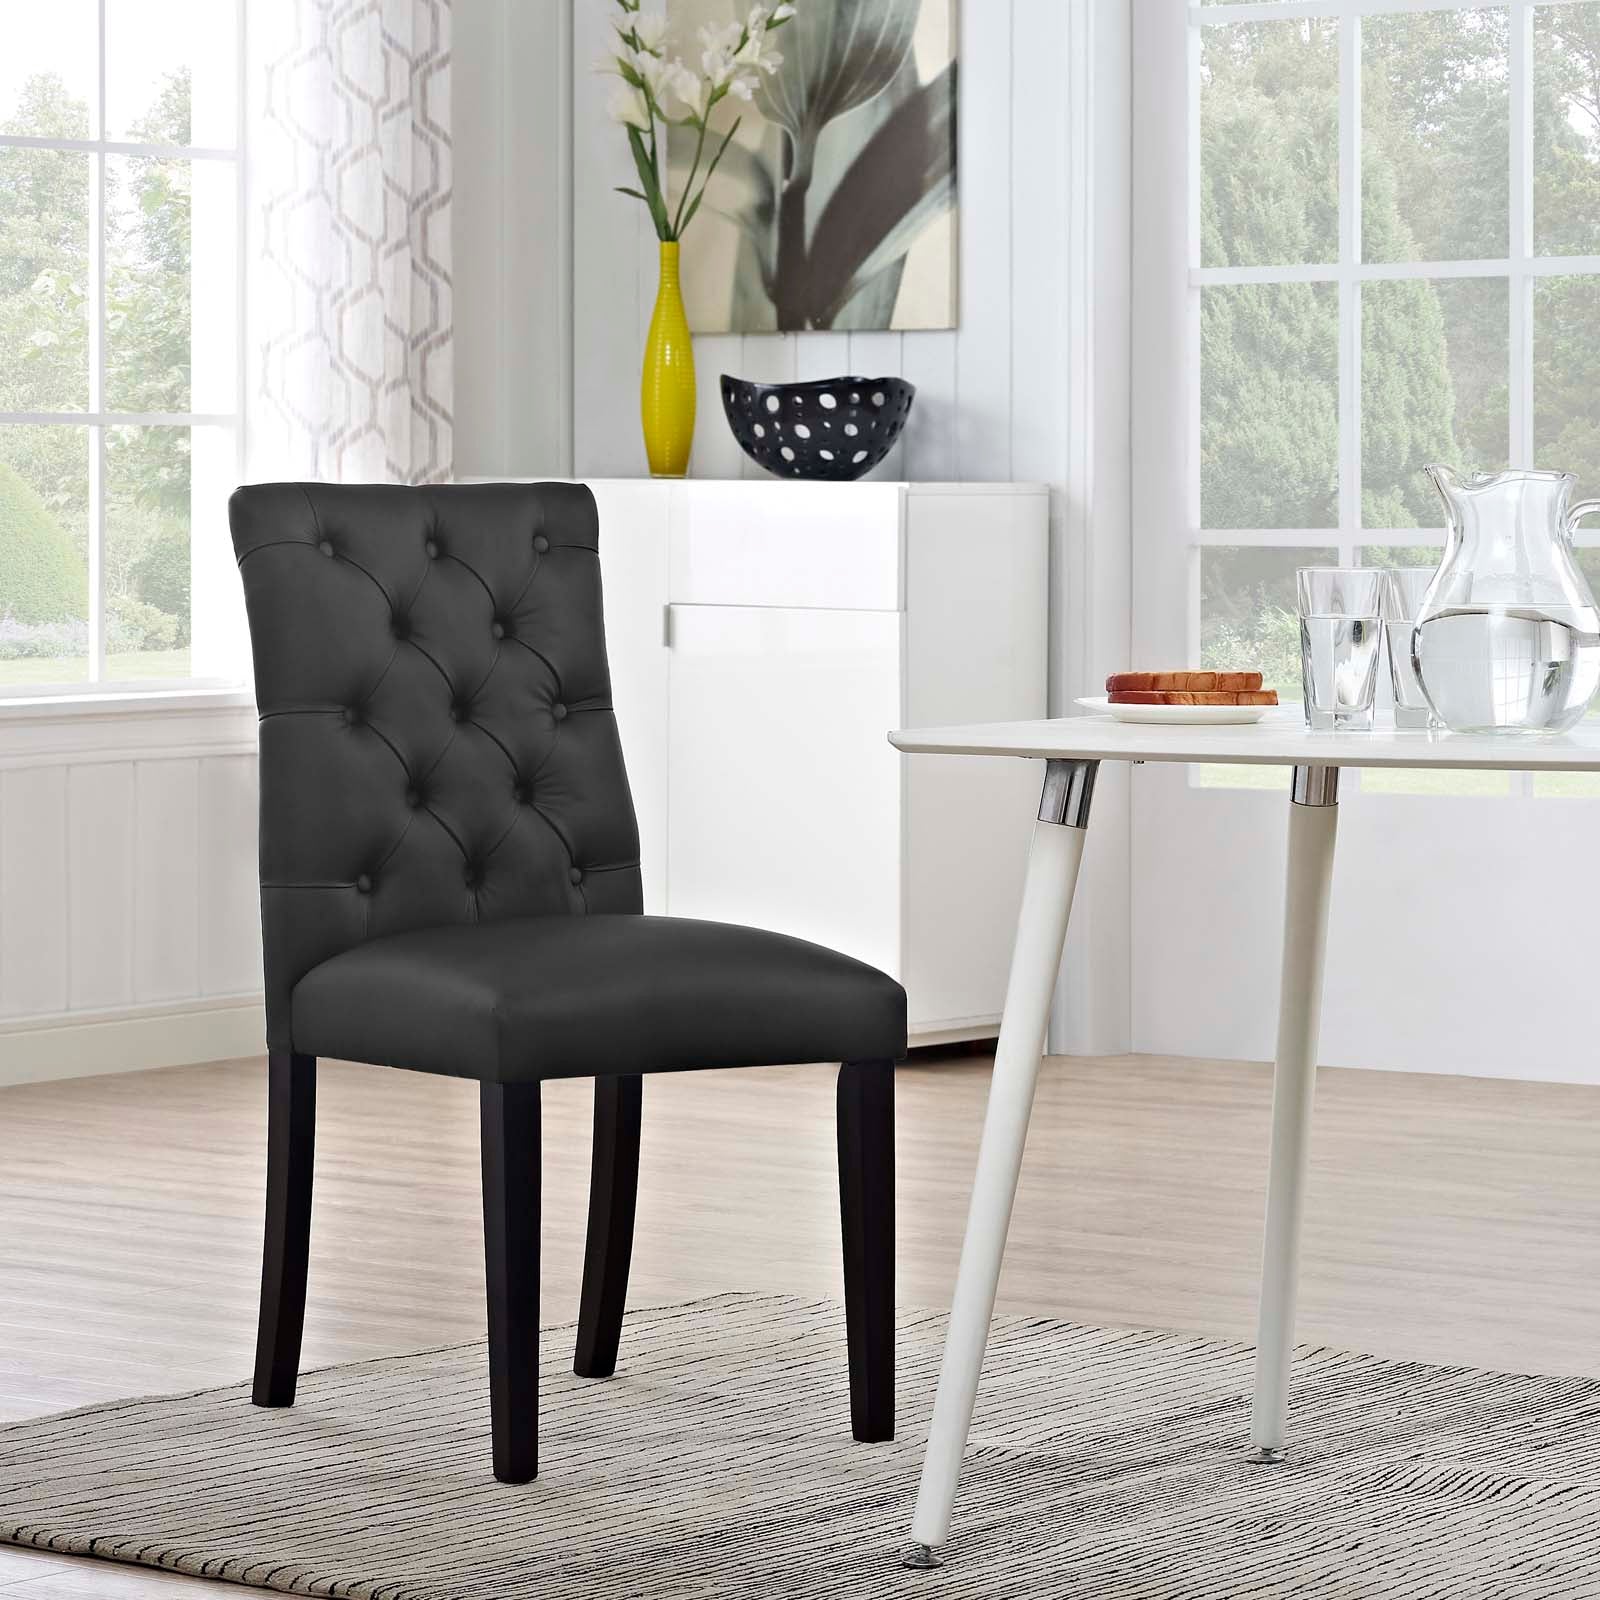 Duchess Button Tufted Vegan Leather Dining Chair - East Shore Modern Home Furnishings